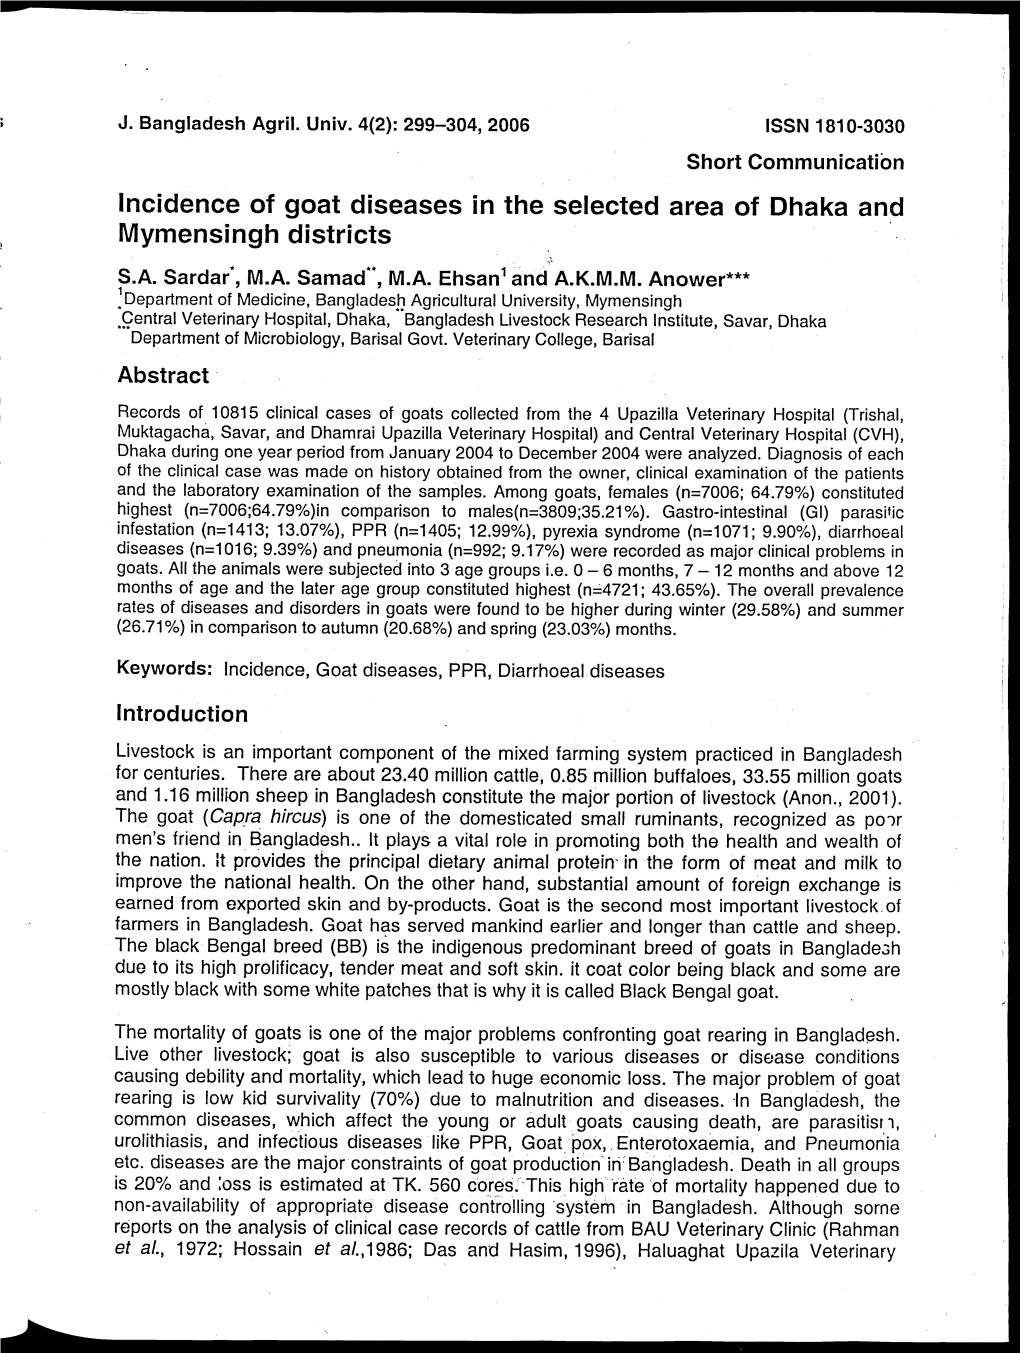 Incidence of Goat Diseases in the Selected Area of Dhaka and Mymensingh Districts